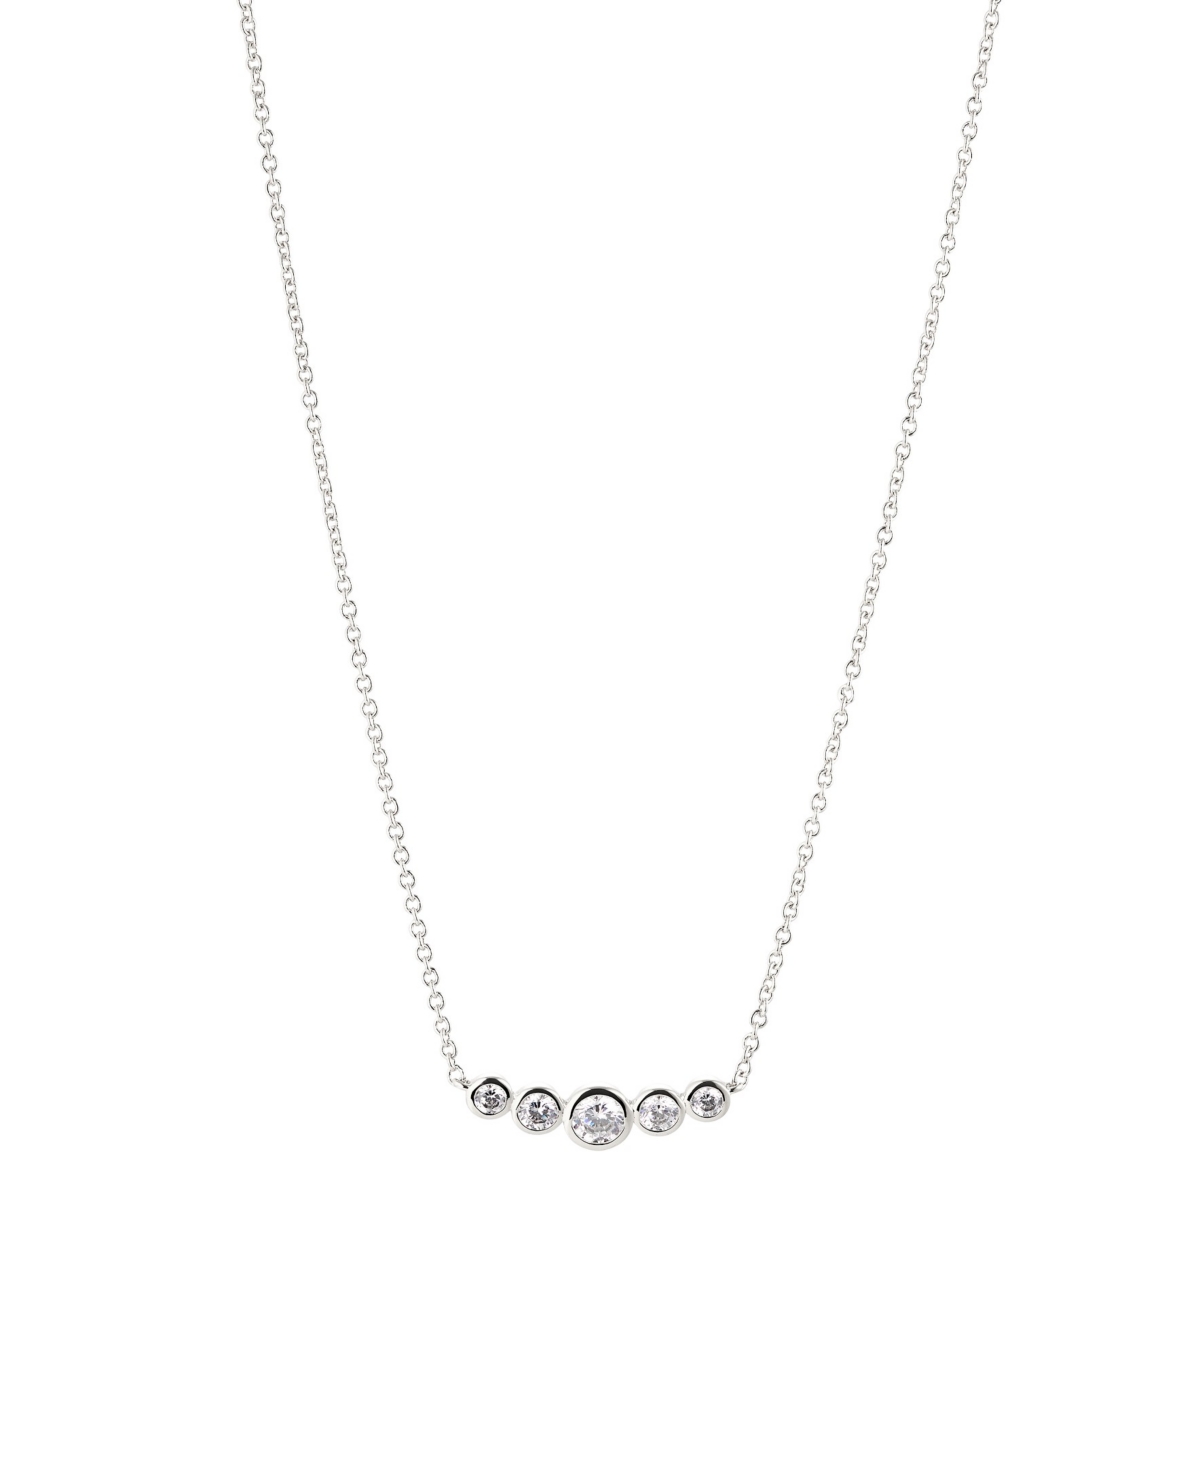 Danori Women's Frontal Necklace, Created for Macy's - Silver-tone